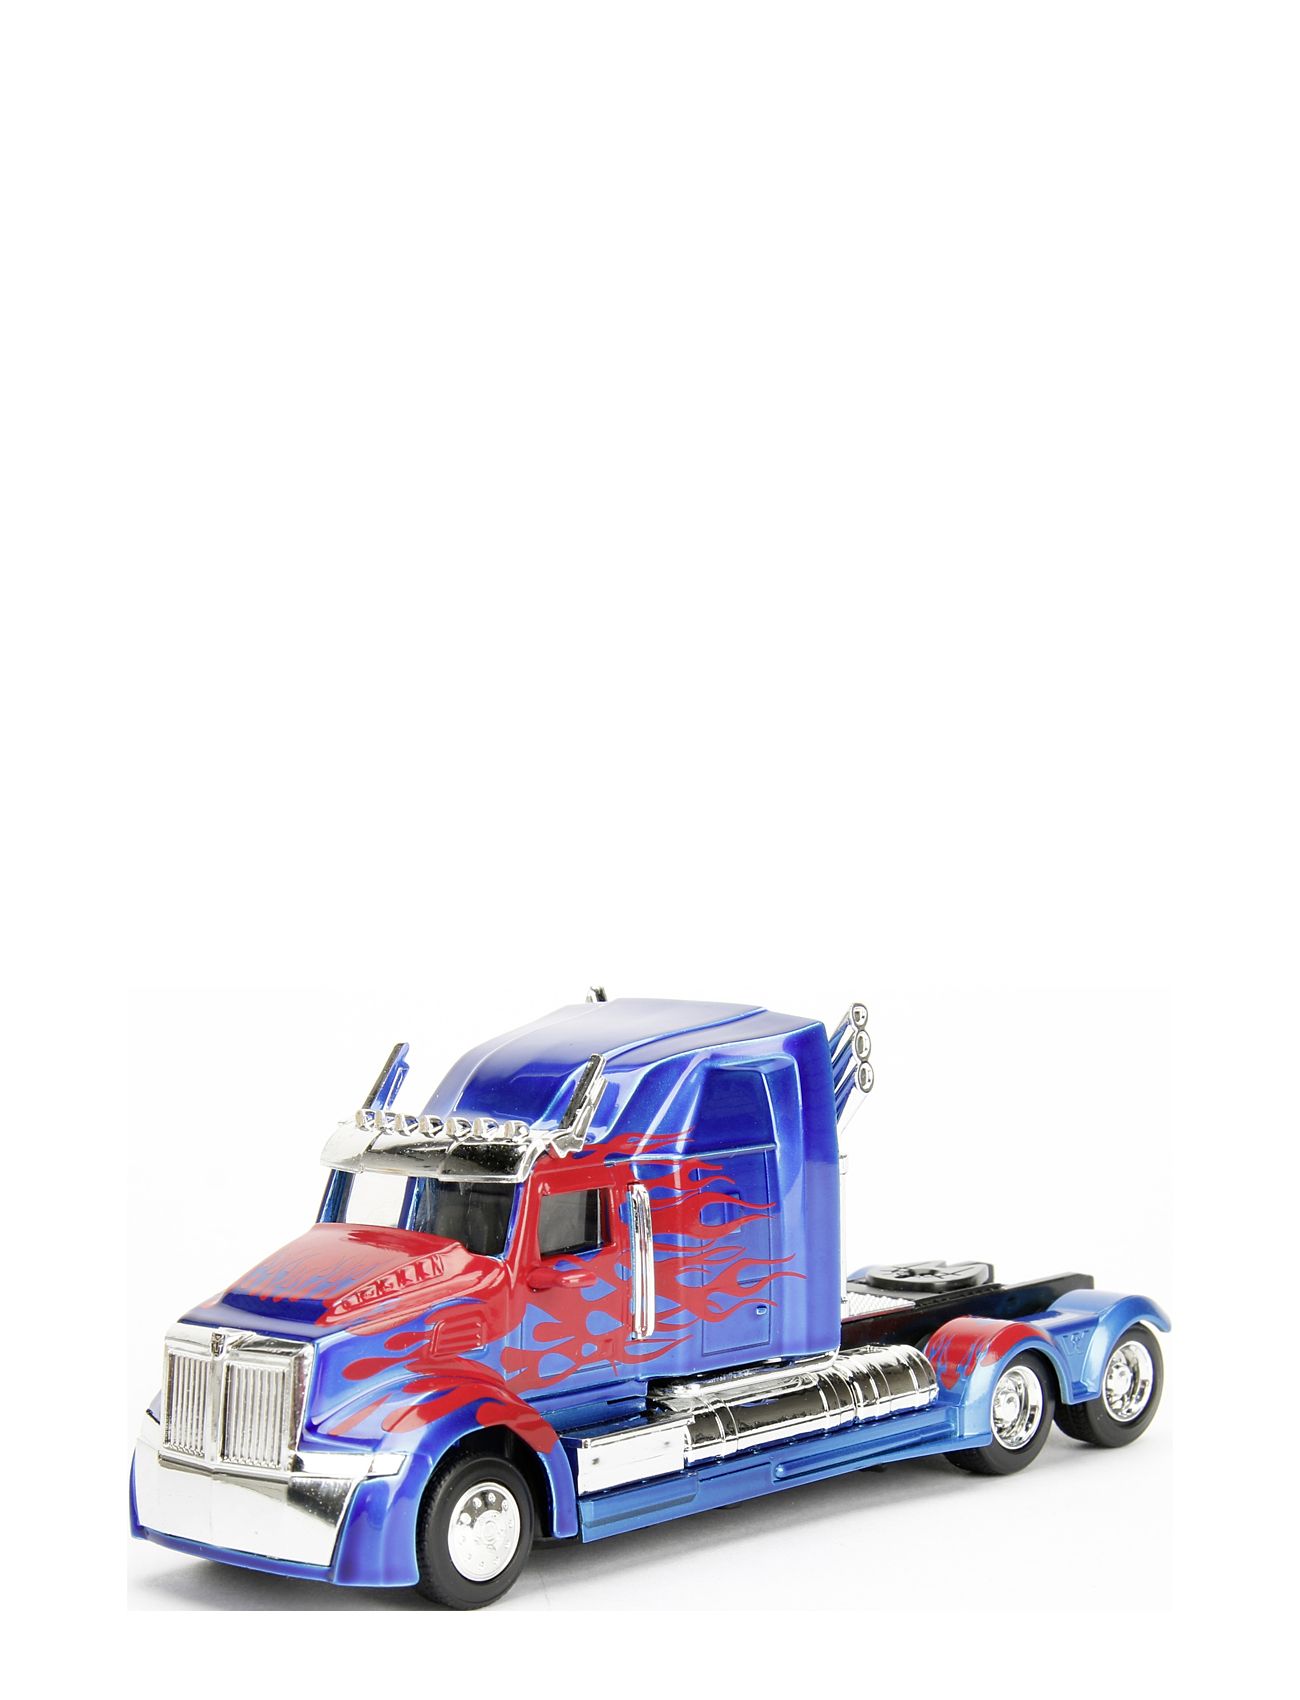 Transformers T5 Optimus Prime 1:32 Toys Toy Cars & Vehicles Toy Vehicles Trucks Multi/patterned Jada Toys